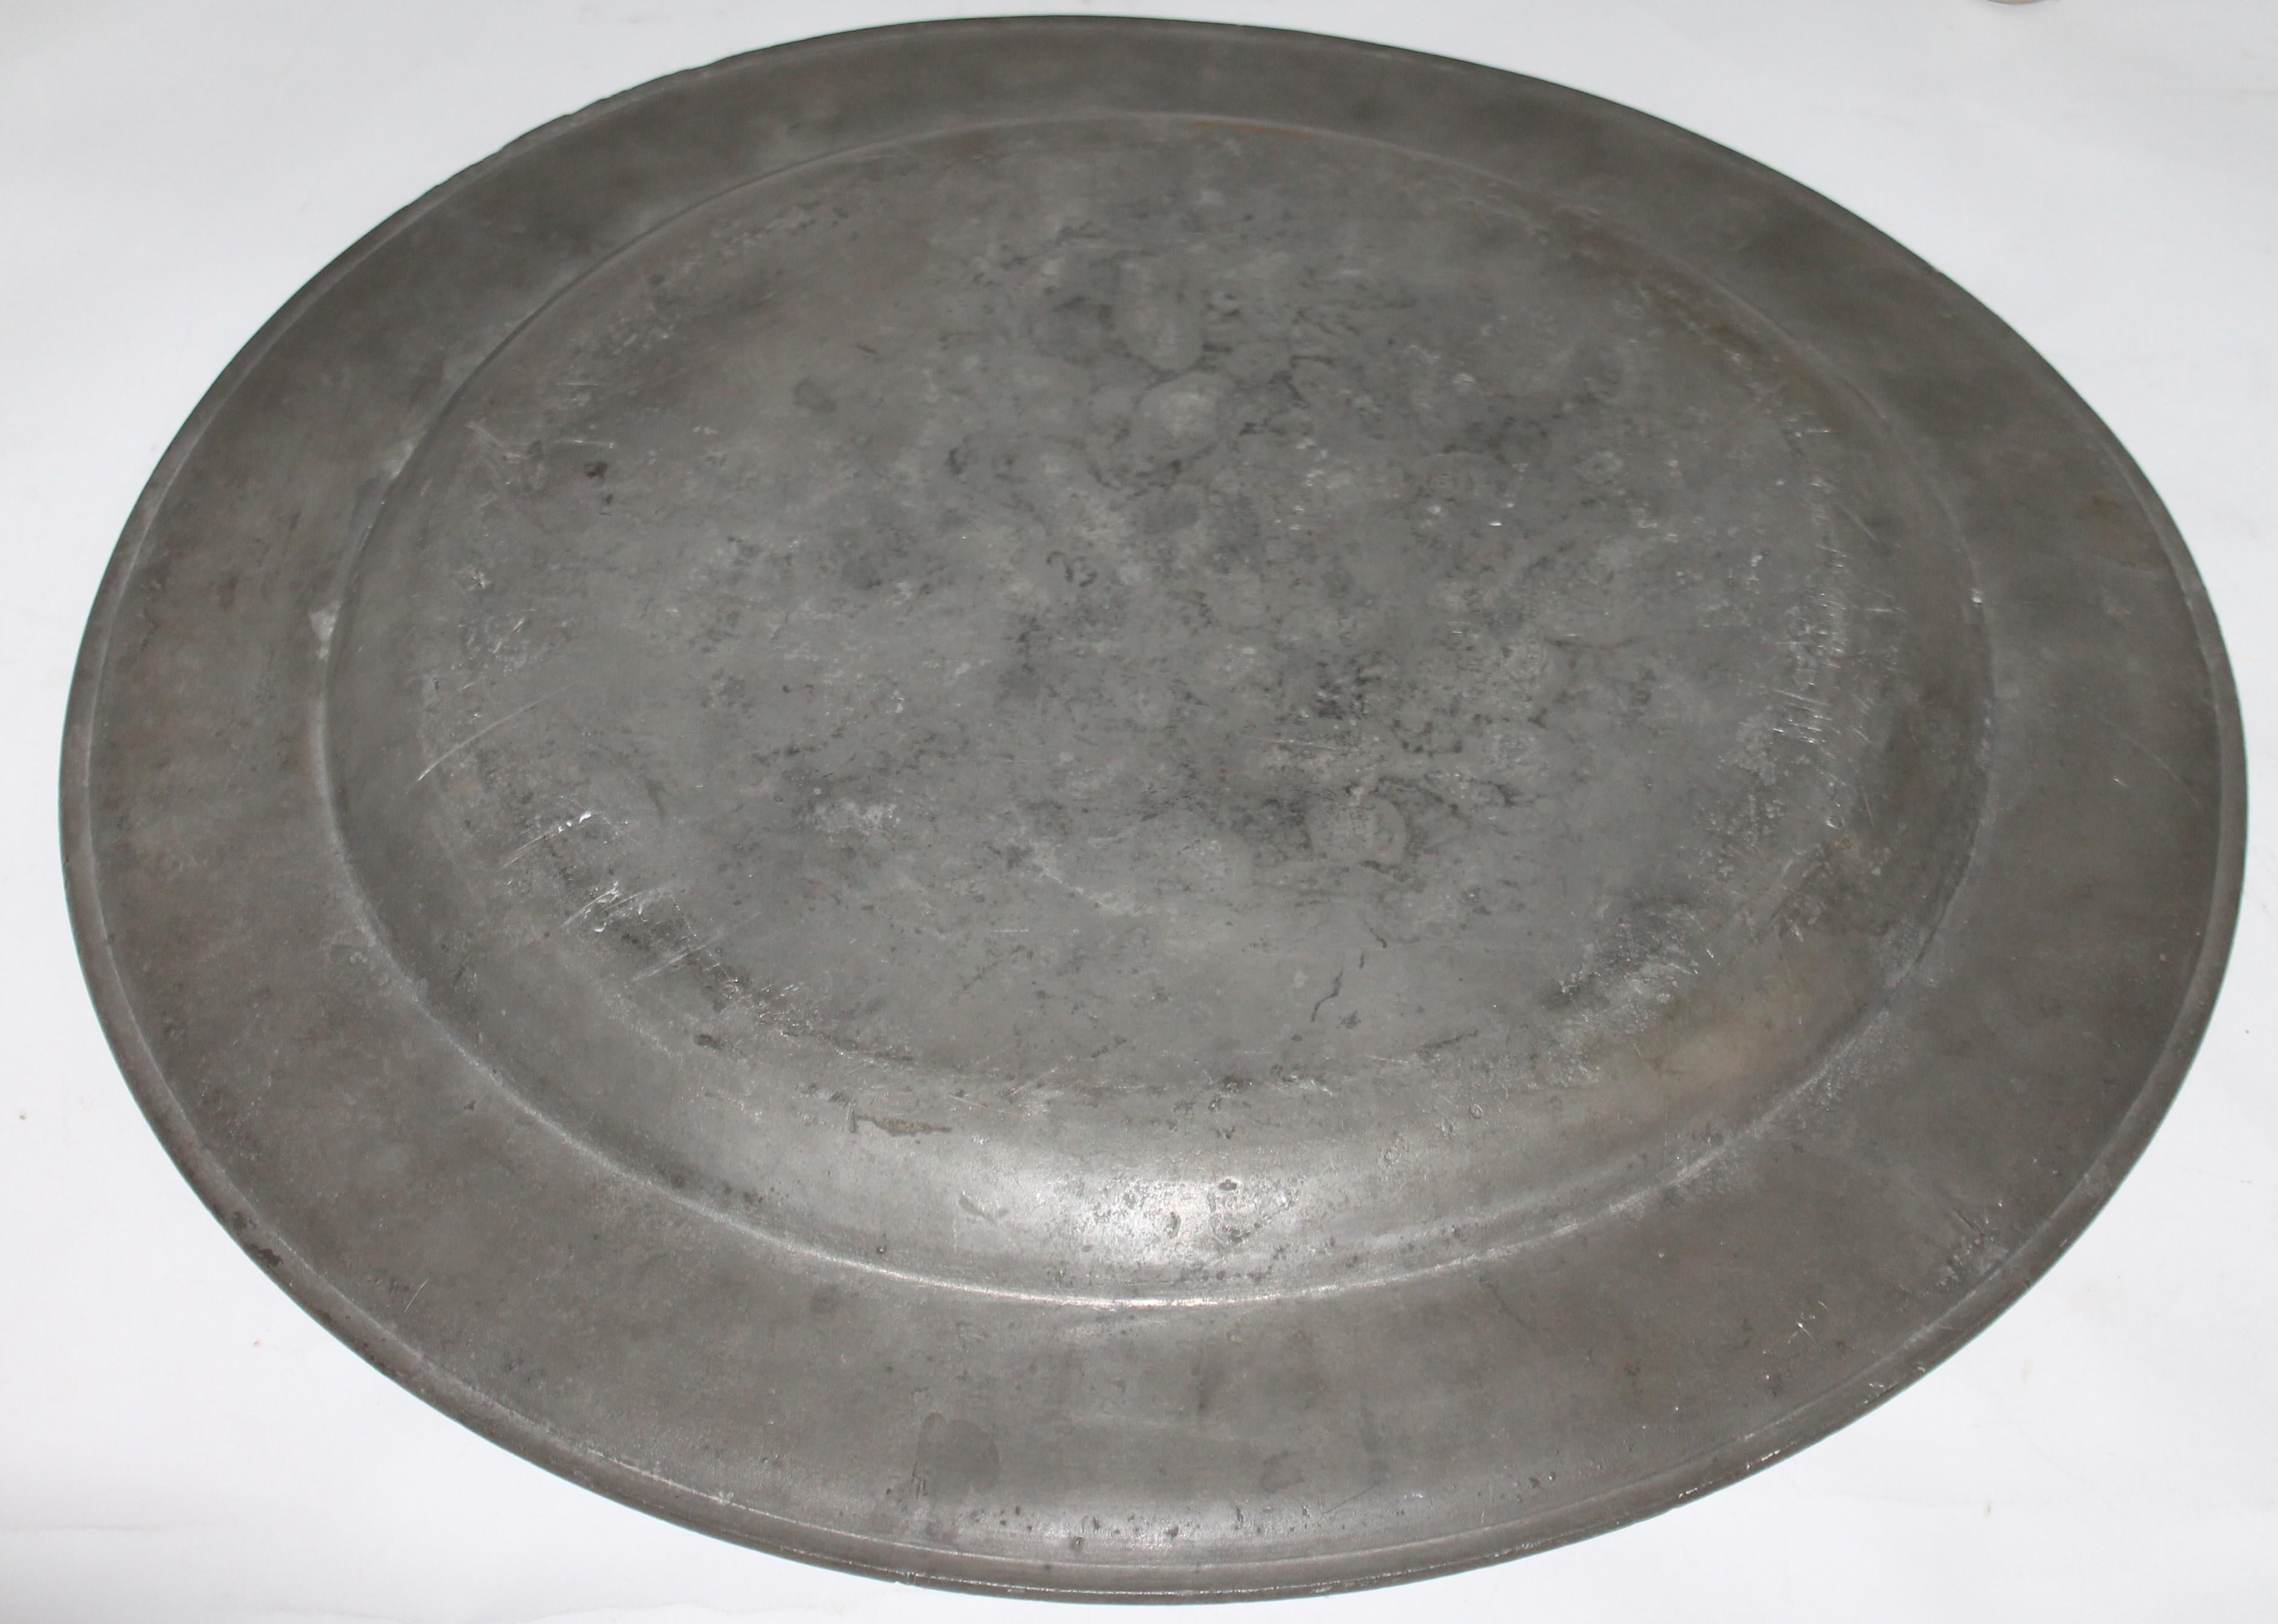 18th century English pewter charger in fine condition.